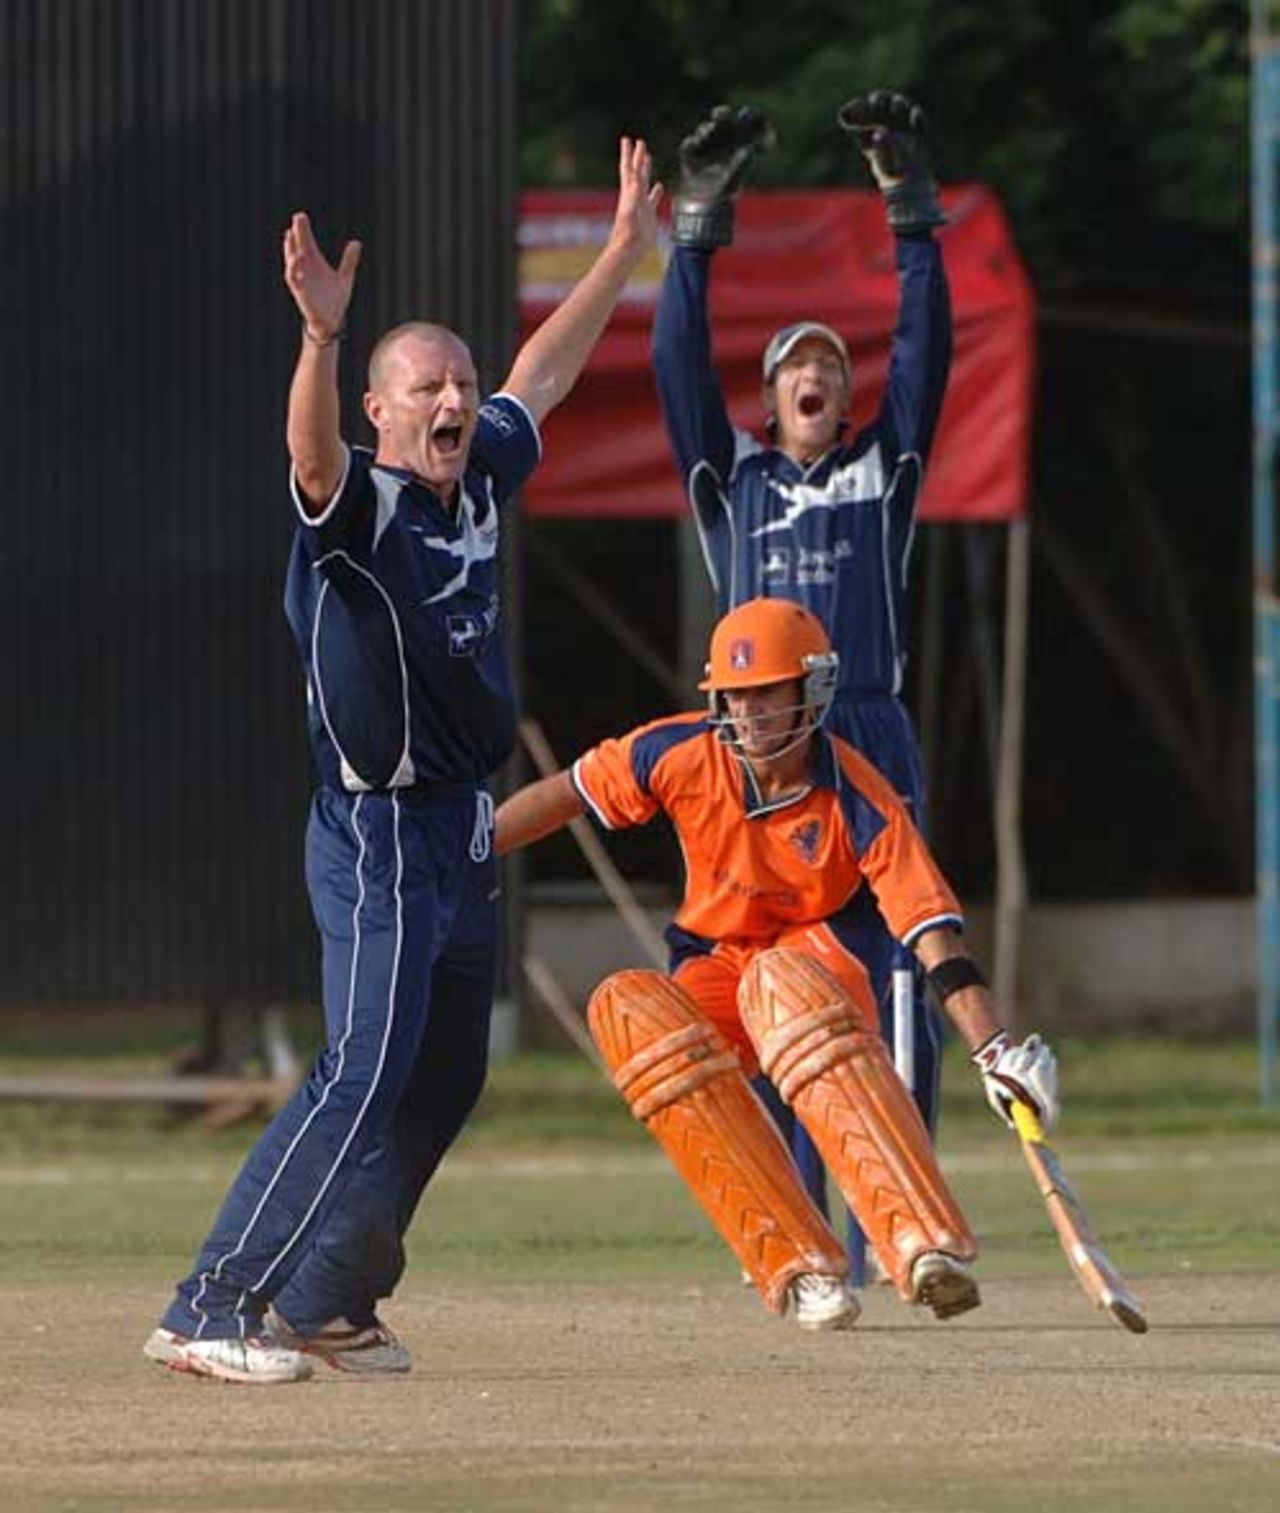 Dougie Brown appeals without success, Scotland v Netherlands, World Cricket League, 9th Match, Jaffery Sports Club, February 2, 2007